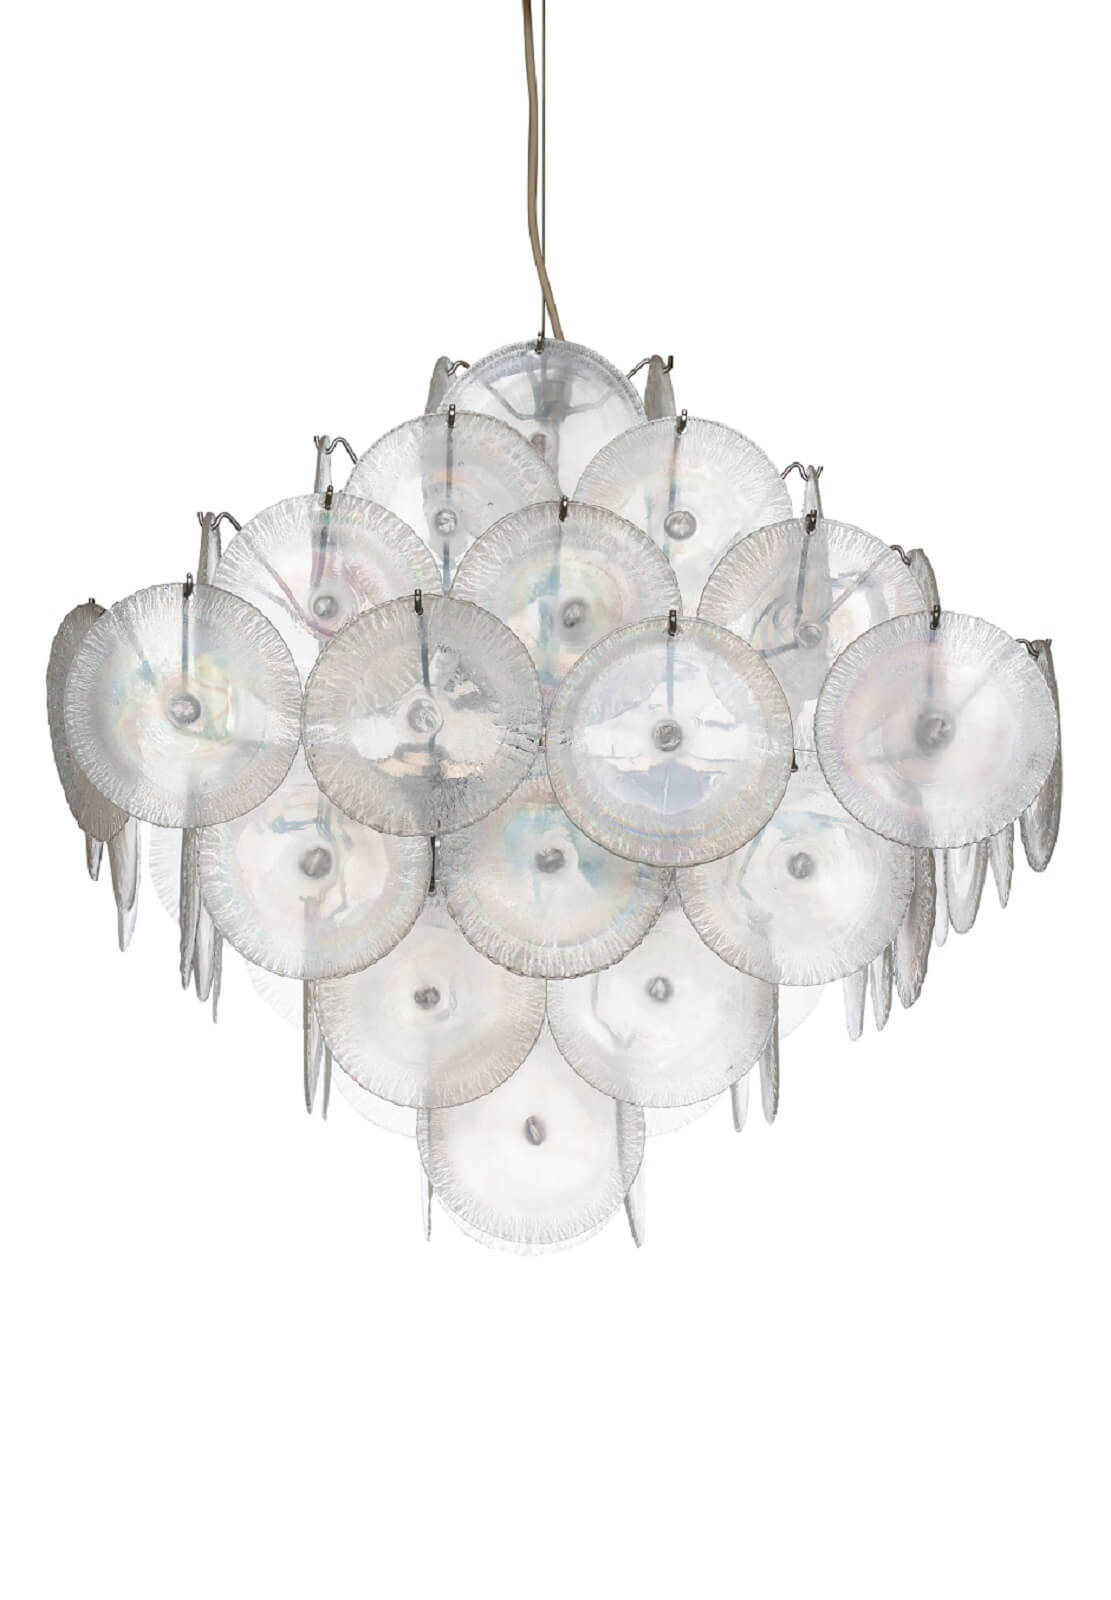 Ceiling lamp by A.V. Mazegga for sale